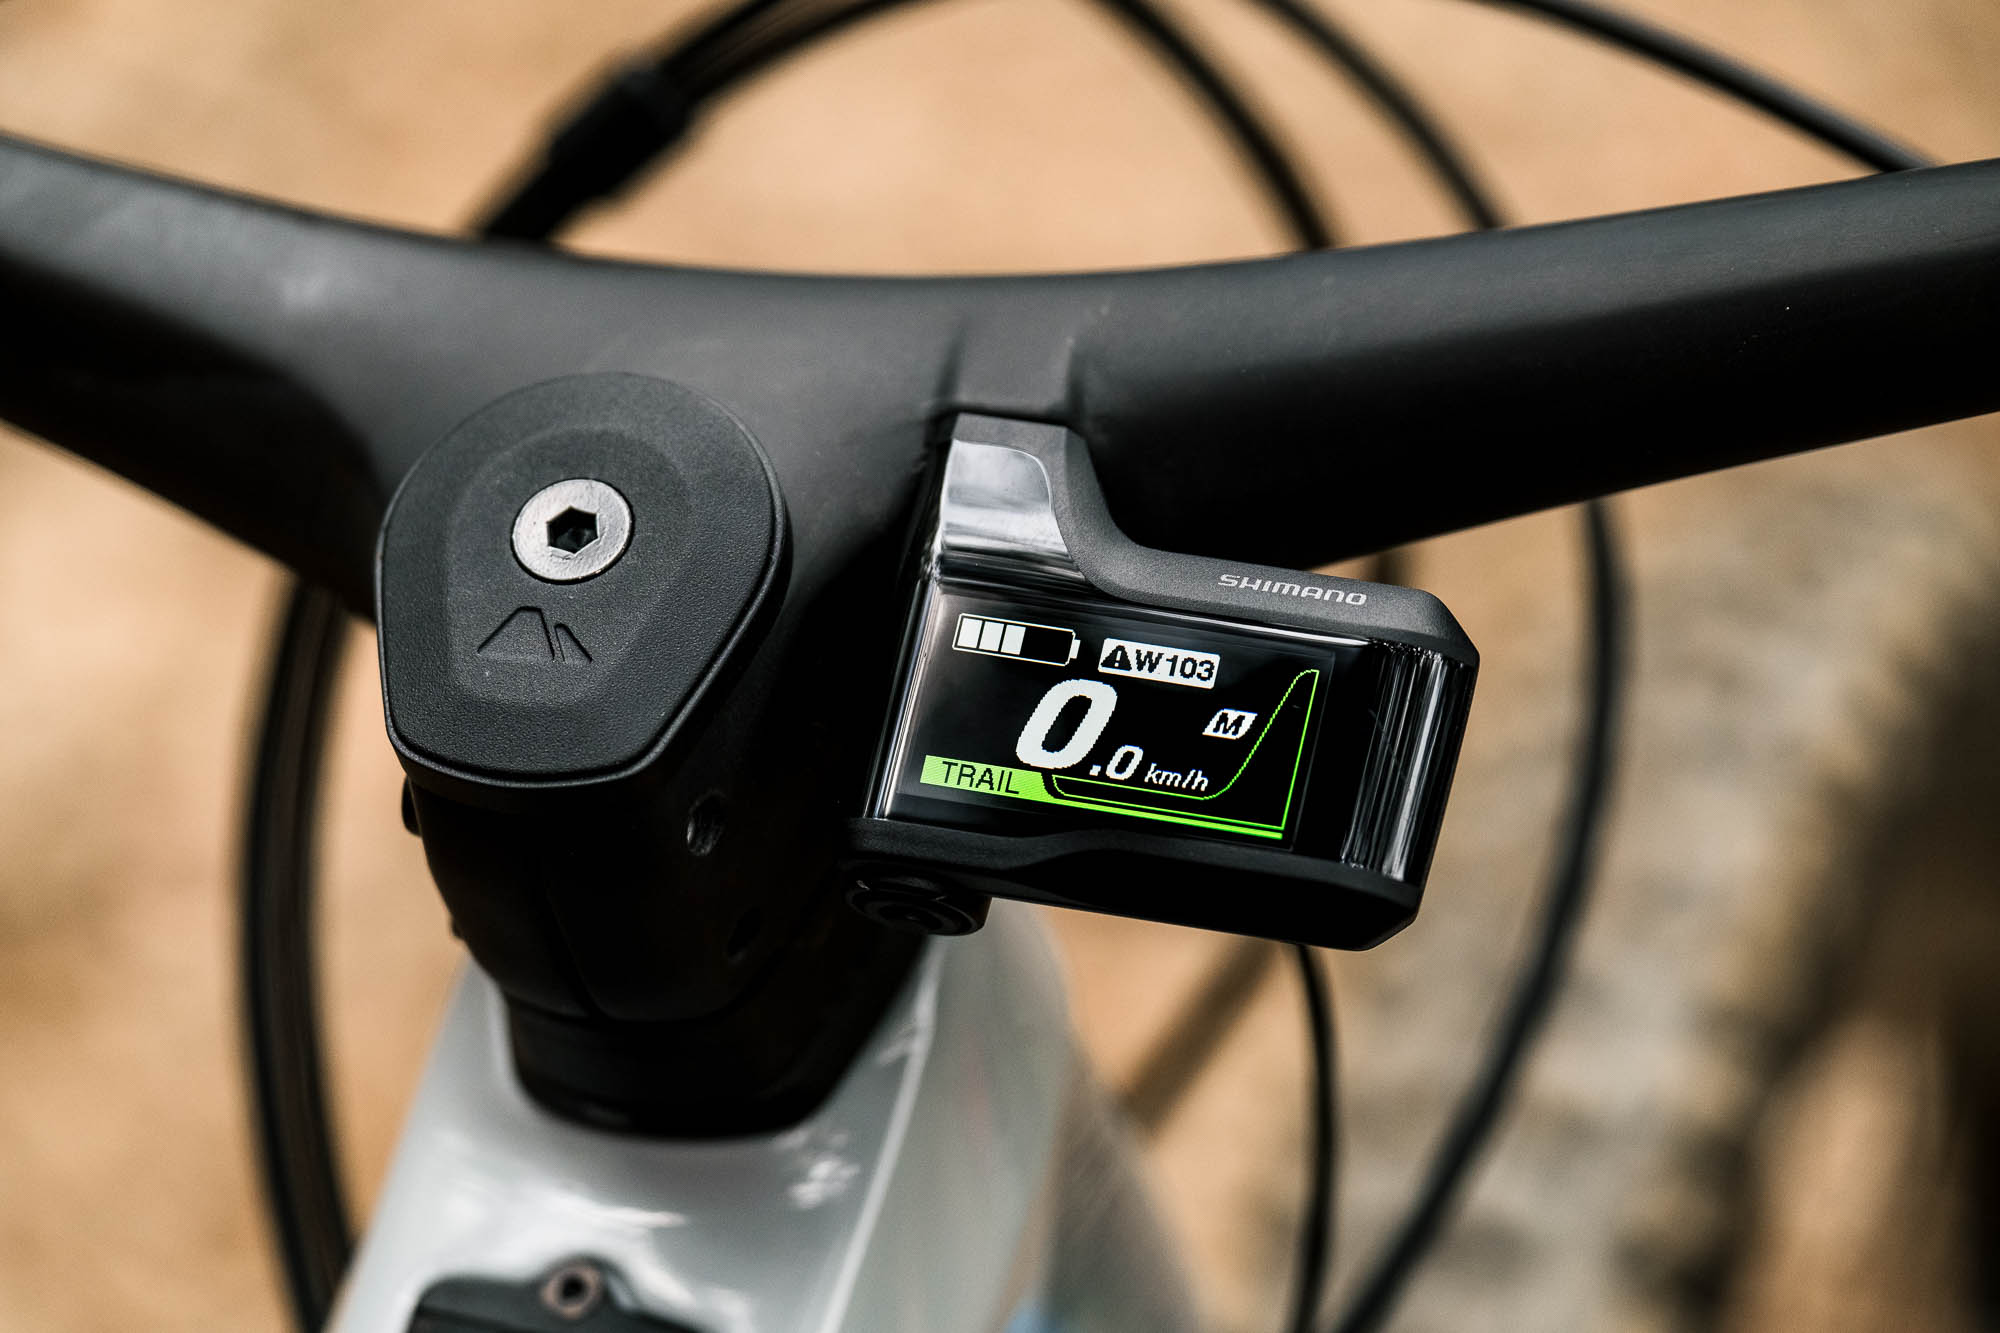 Ebike error codes and their solutions – Bosch 503, Shimano W103